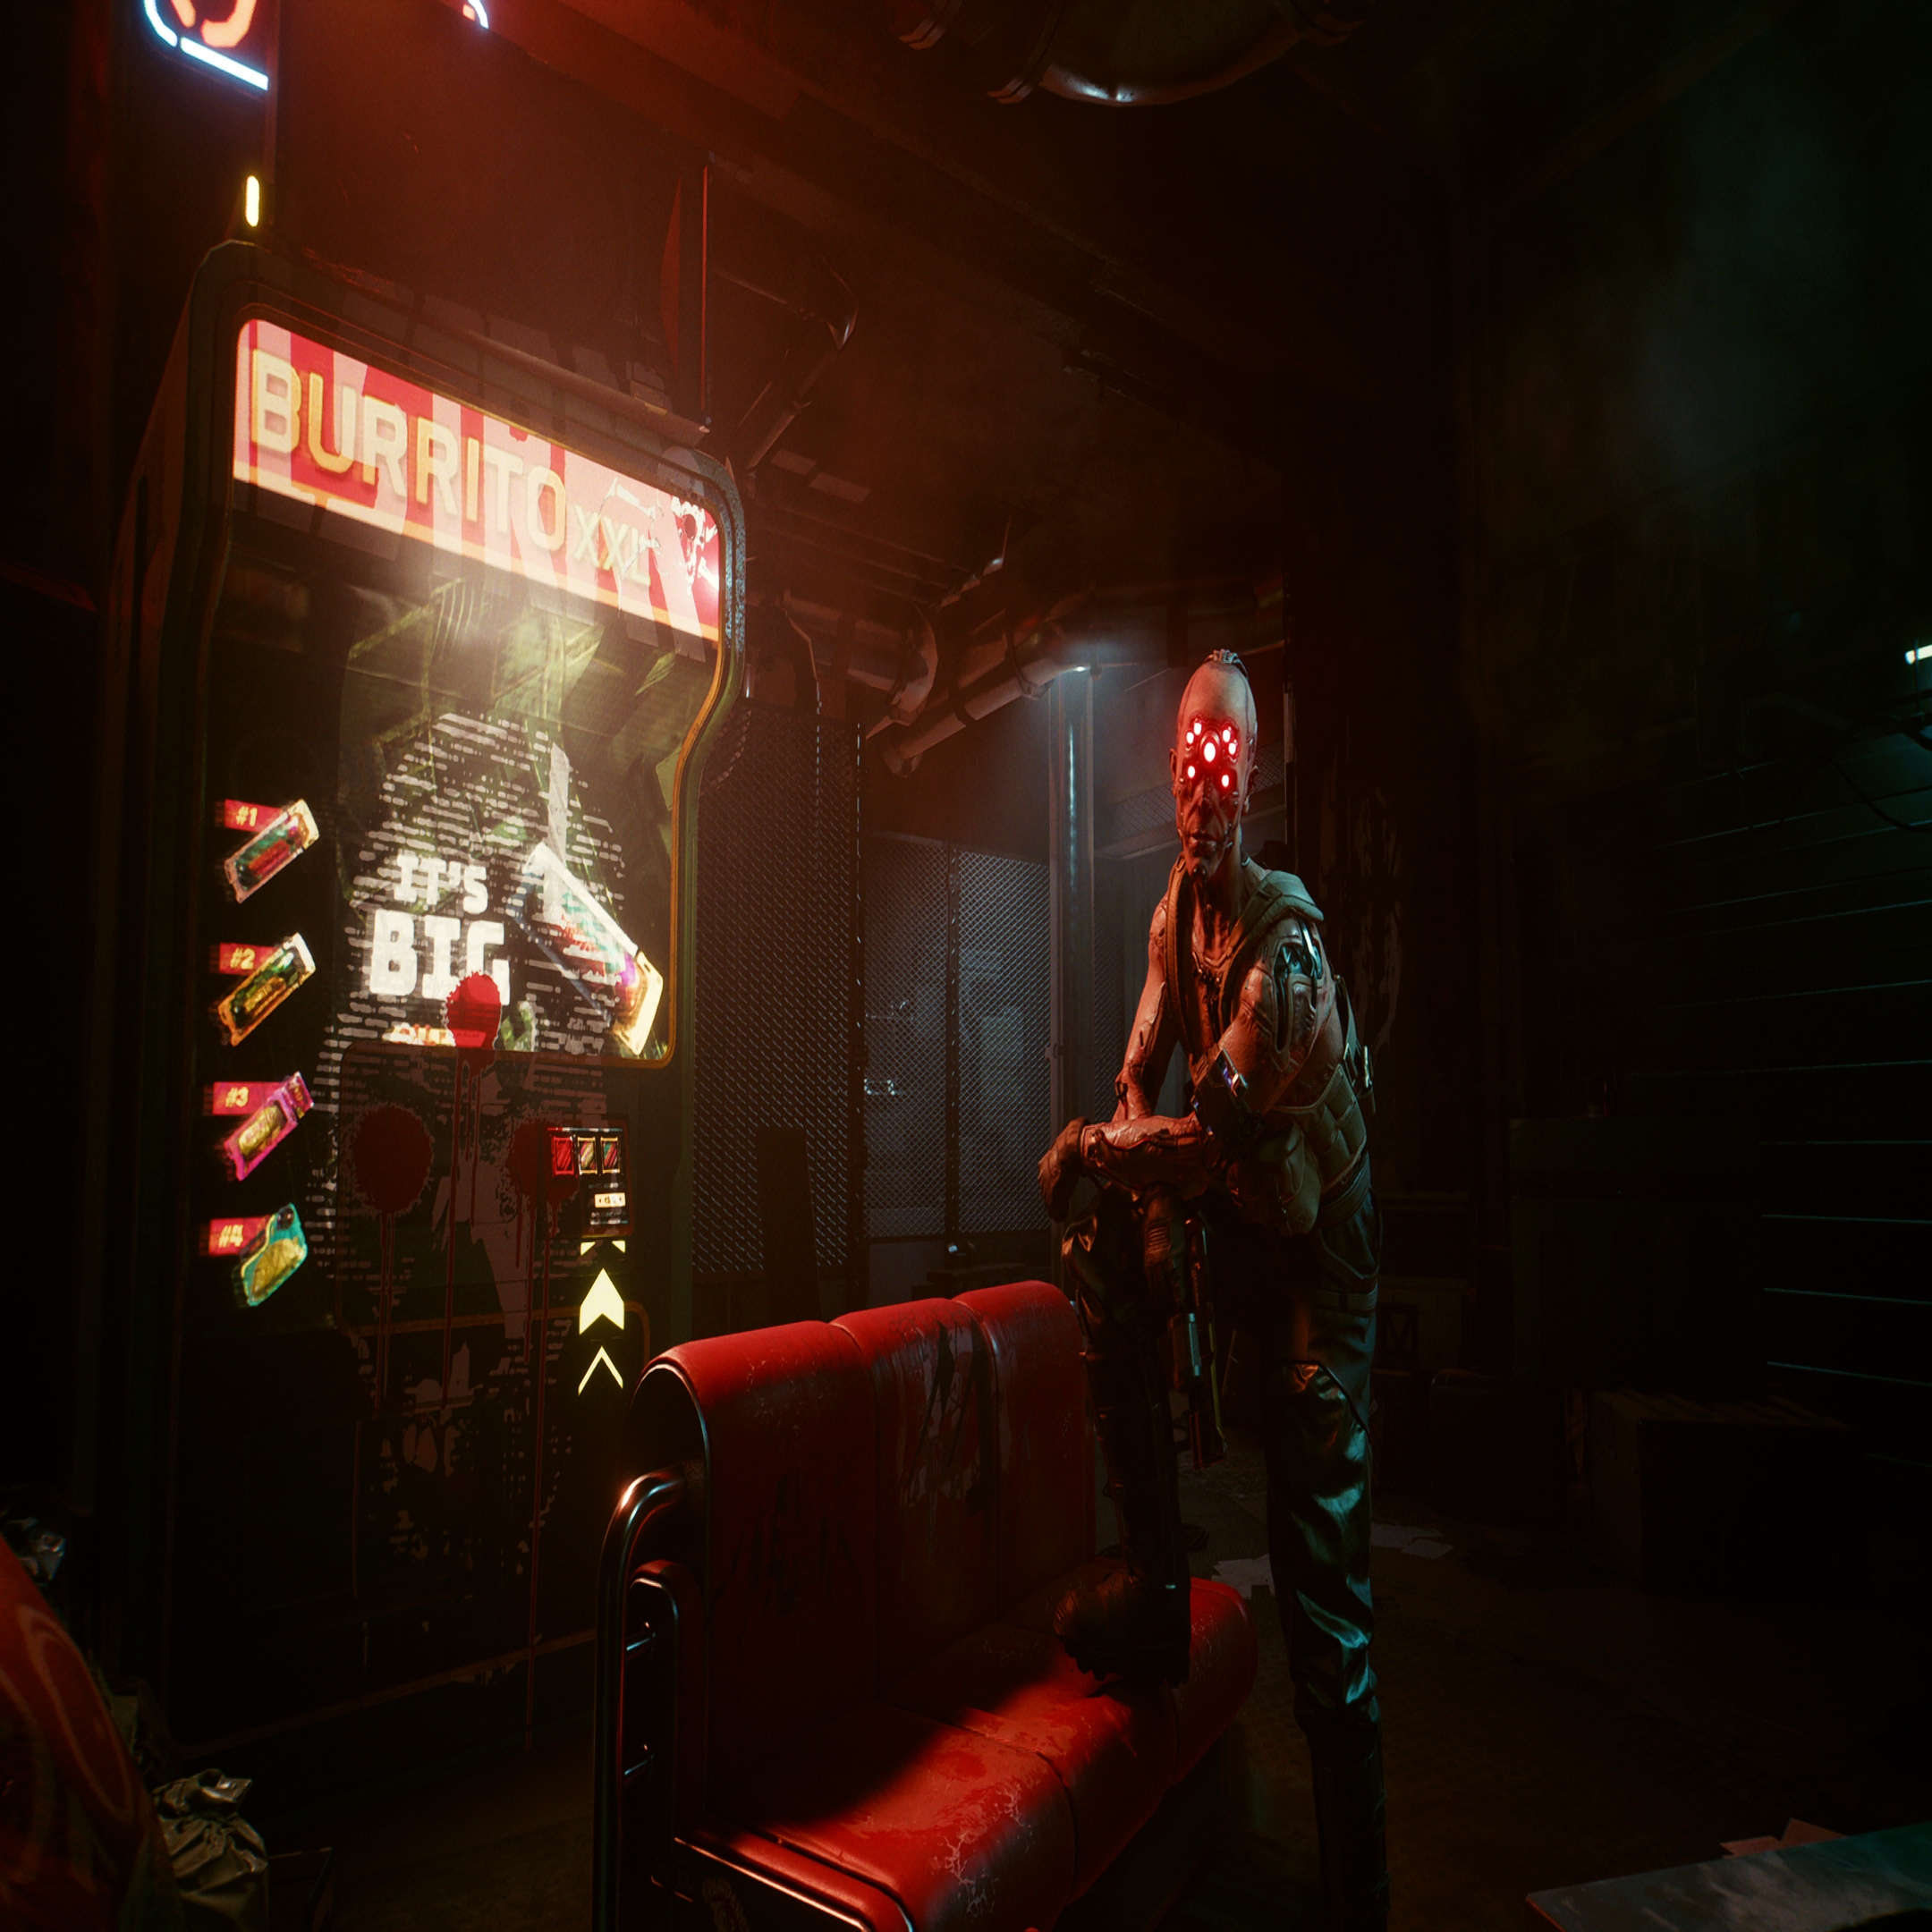 Cyberpunk 2077: the state of play for PS5 and Xbox Series consoles